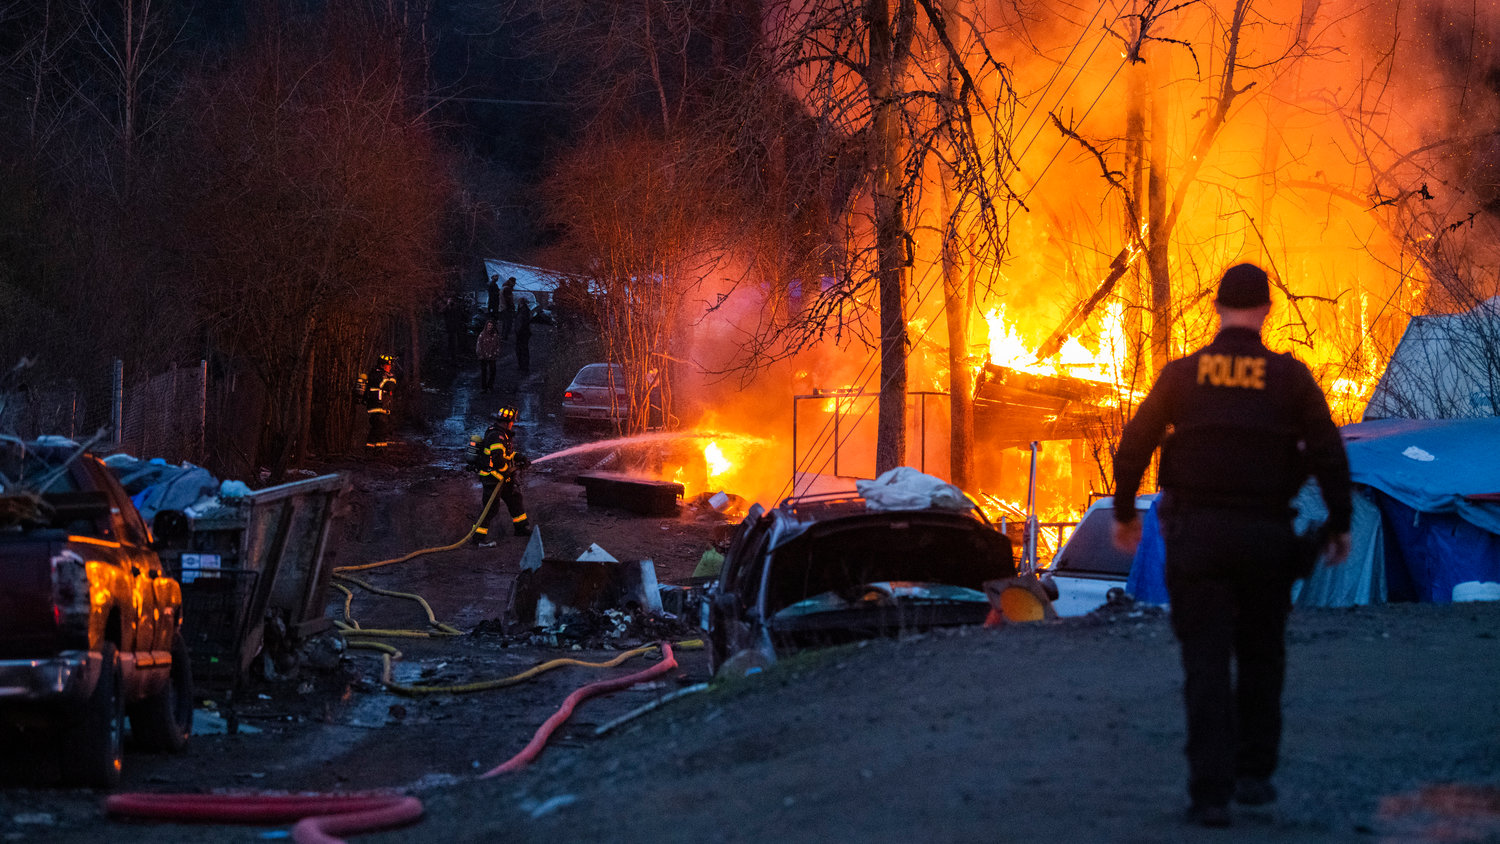 Riverside Fire Authority, Centralia police and the Chehalis Fire Department respond to a scene at the end of Eckerson Road in Centralia near Blakeslee Junction where flames and a column of smoke rose from a structure inside a homeless encampment Tuesday, March 28, 2023.